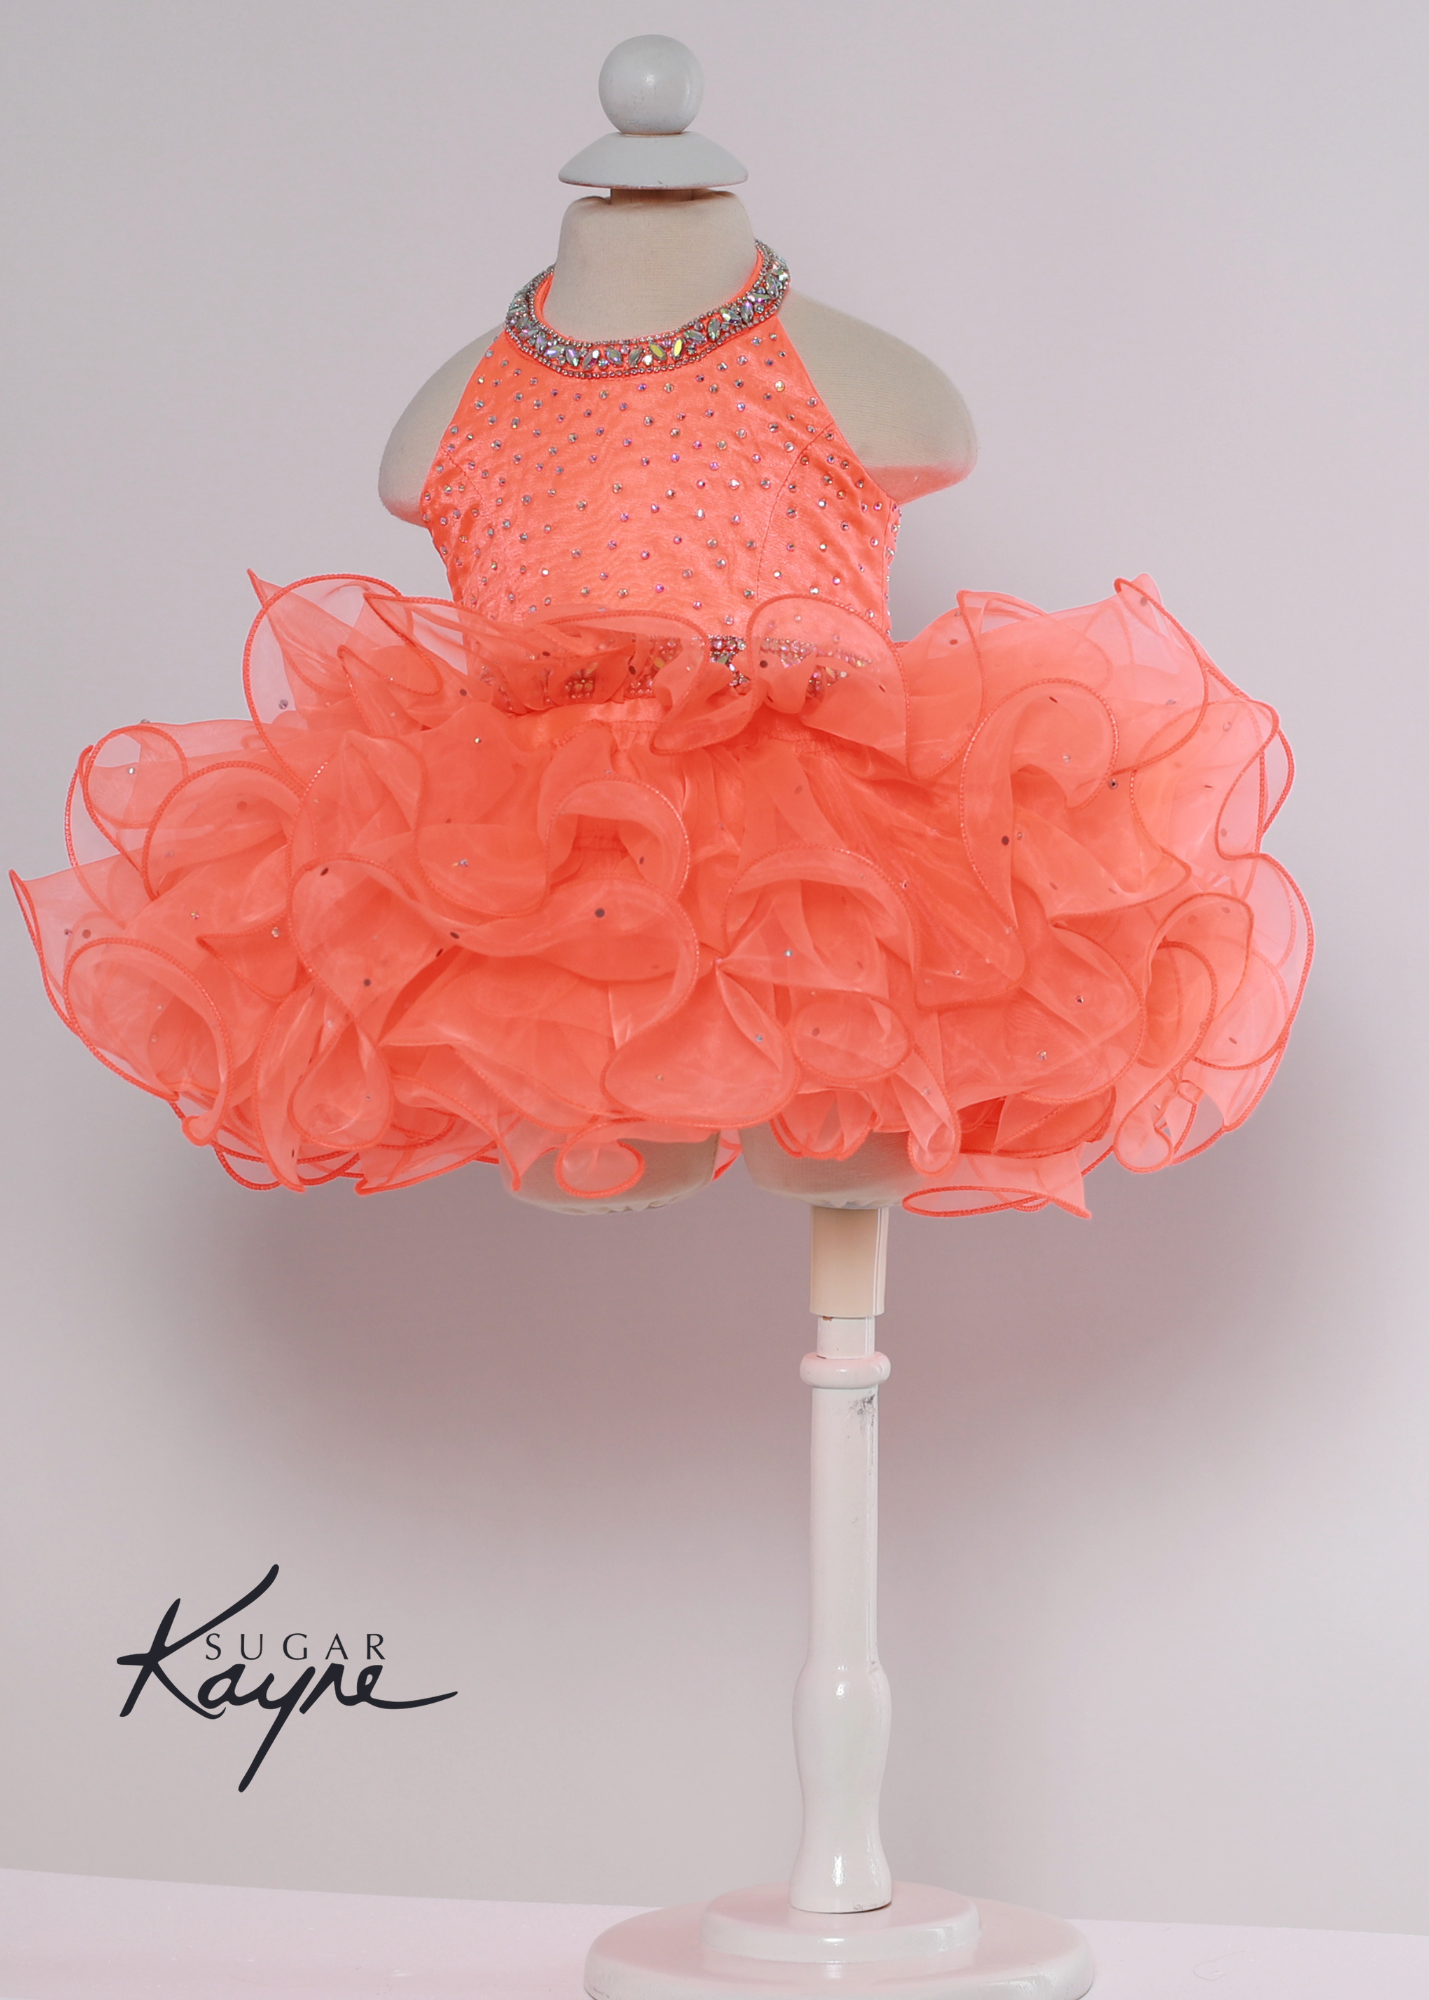 Sugar Kayne C220 Girls Baby Halter Cupcake Ruffle Pageant Dress Corset Formal Gown Have your little cupcake bring on all the charm in this stunning organza gown. The corset back is the perfect addition as the little one grows!  Colors: Bubblegum, Neon Orange, White  Sizes: 0M, 12M, 18M, 24M, 2T, 3T, 4T, 5T, 6M, 6T  Fabric Organza, Satin Lining